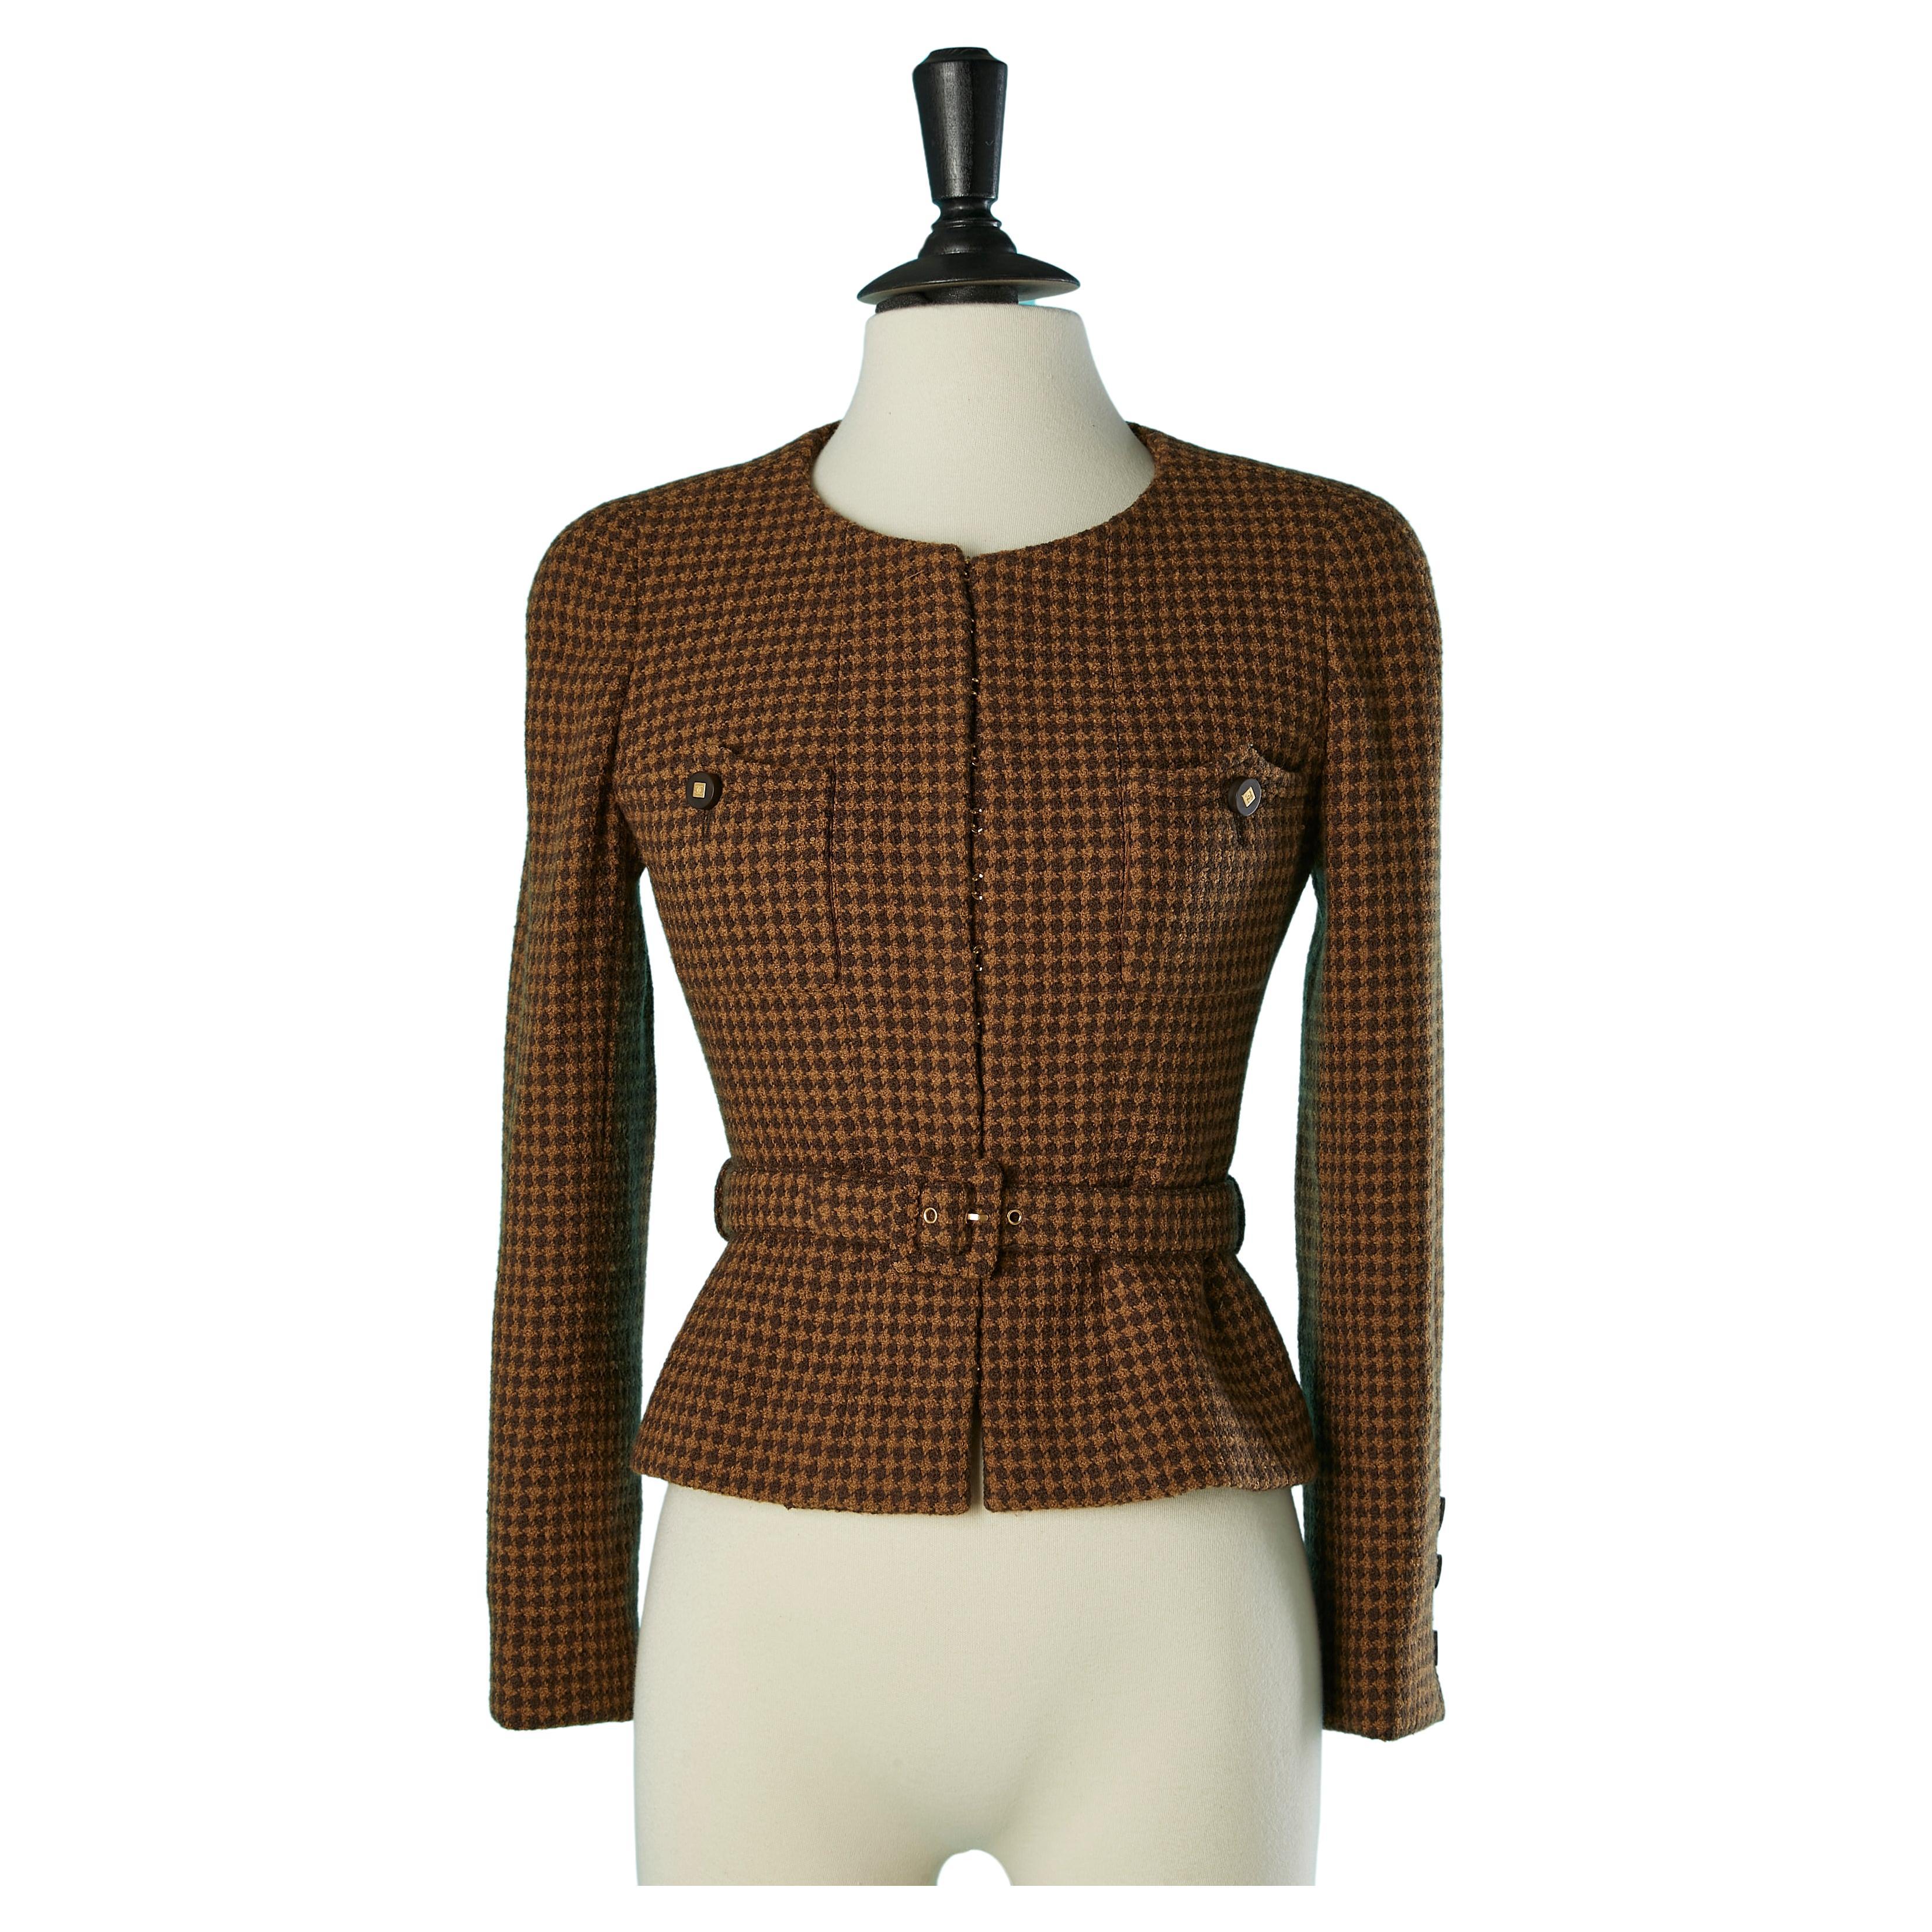 Edge to edge jacket with hook & eye closure and belt Chanel Boutique 